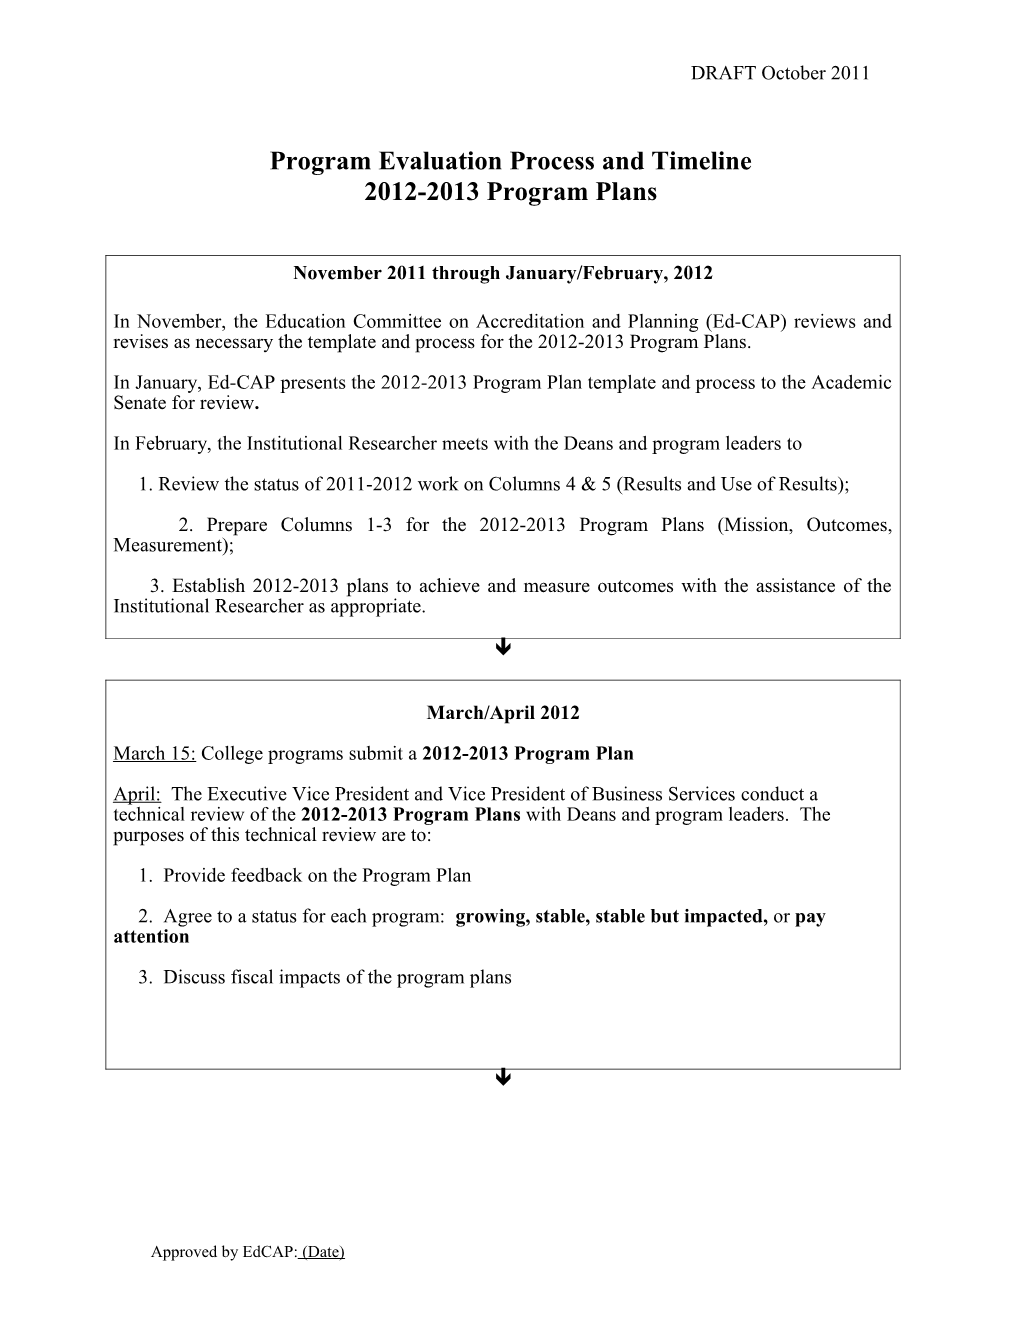 DRAFT 012207 How Does the College Community Participate in the Review of Annual Program Plans